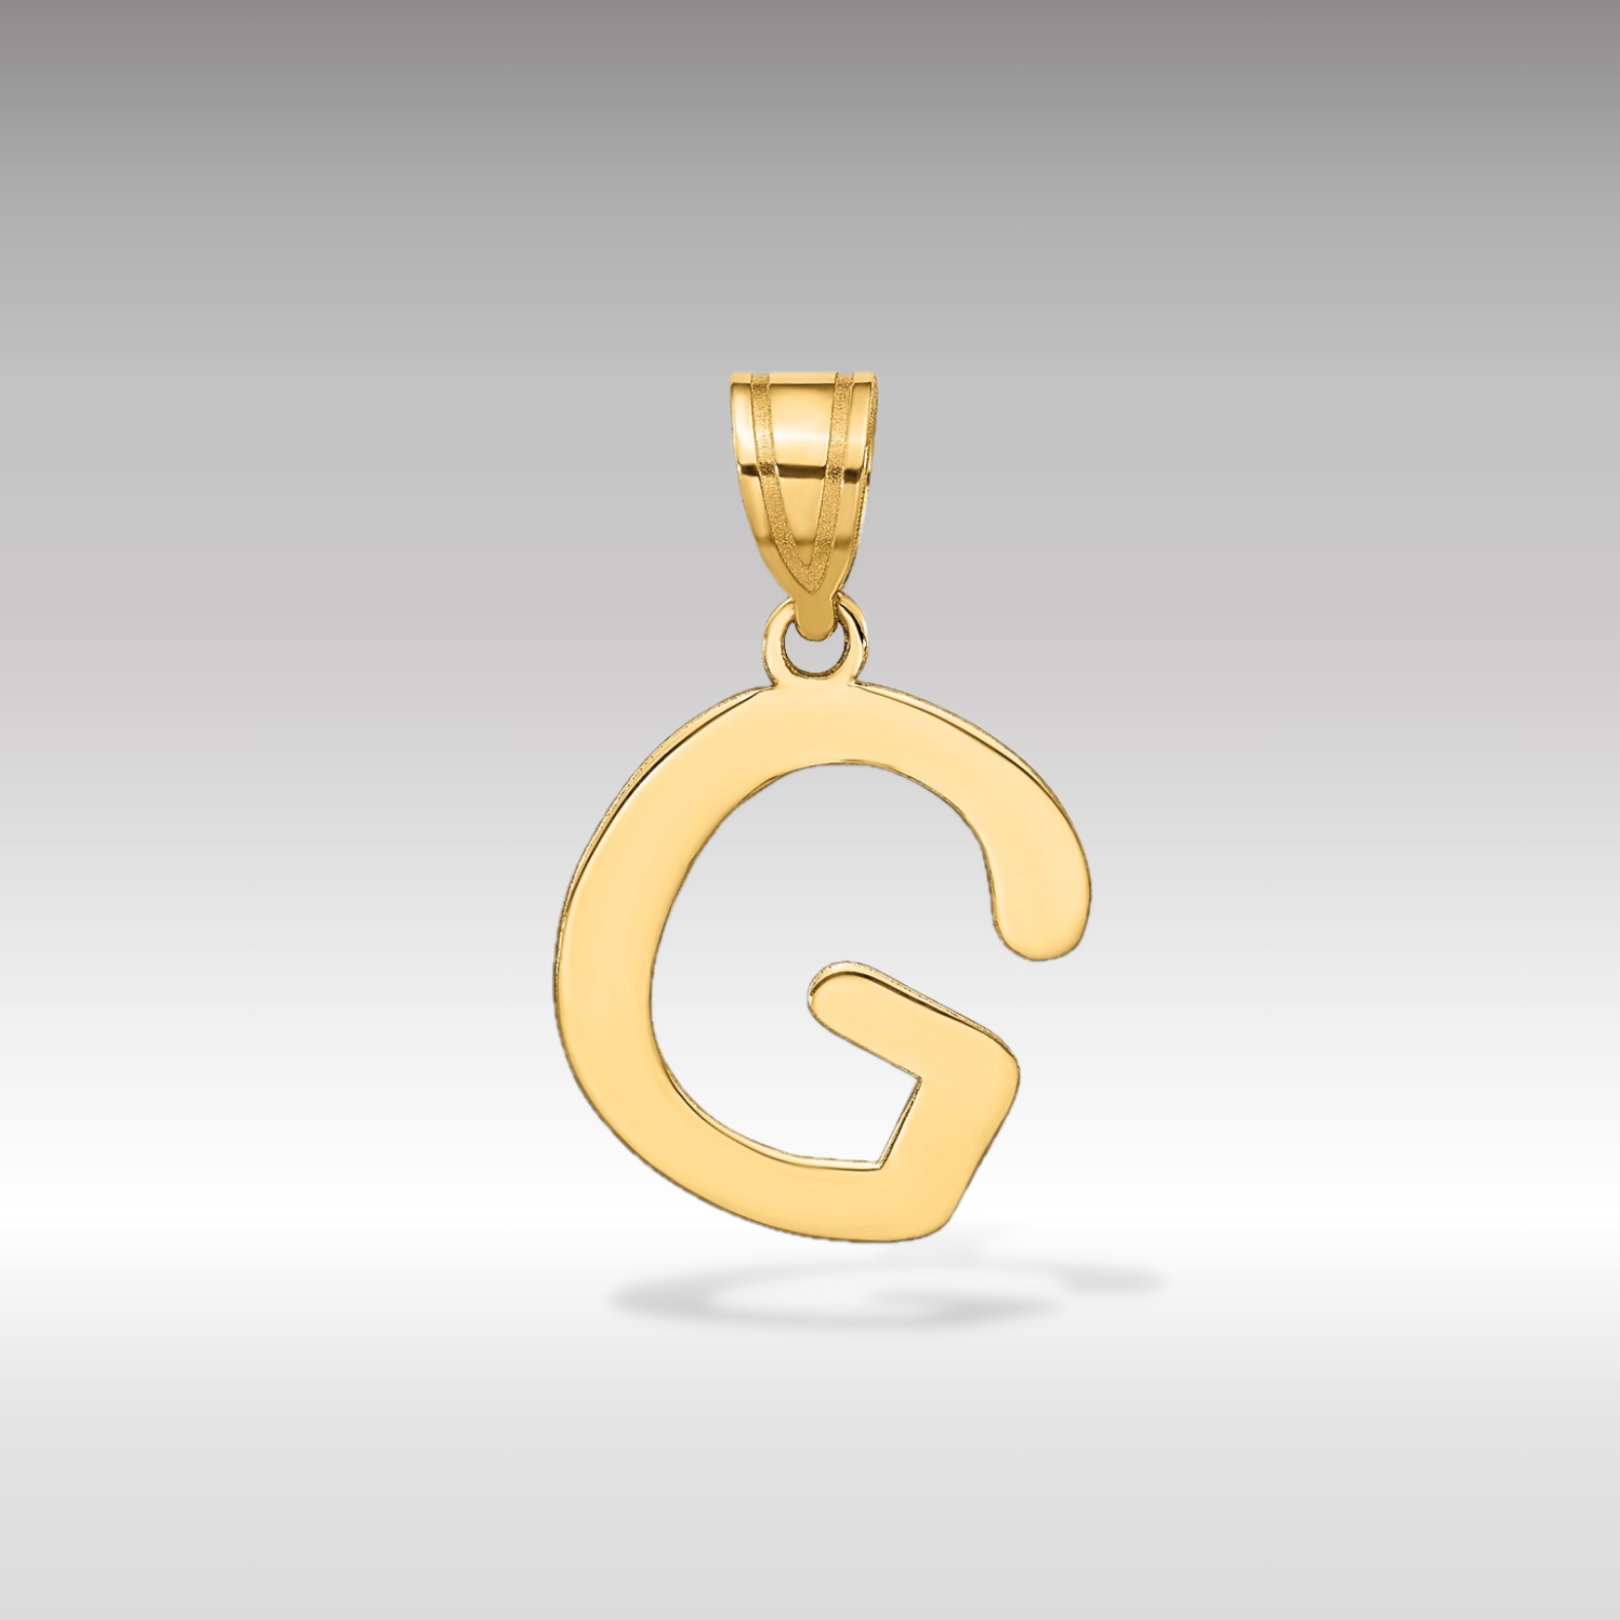 14k Gold Polished Letter 'G' Initial Charm - Charlie & Co. Jewelry